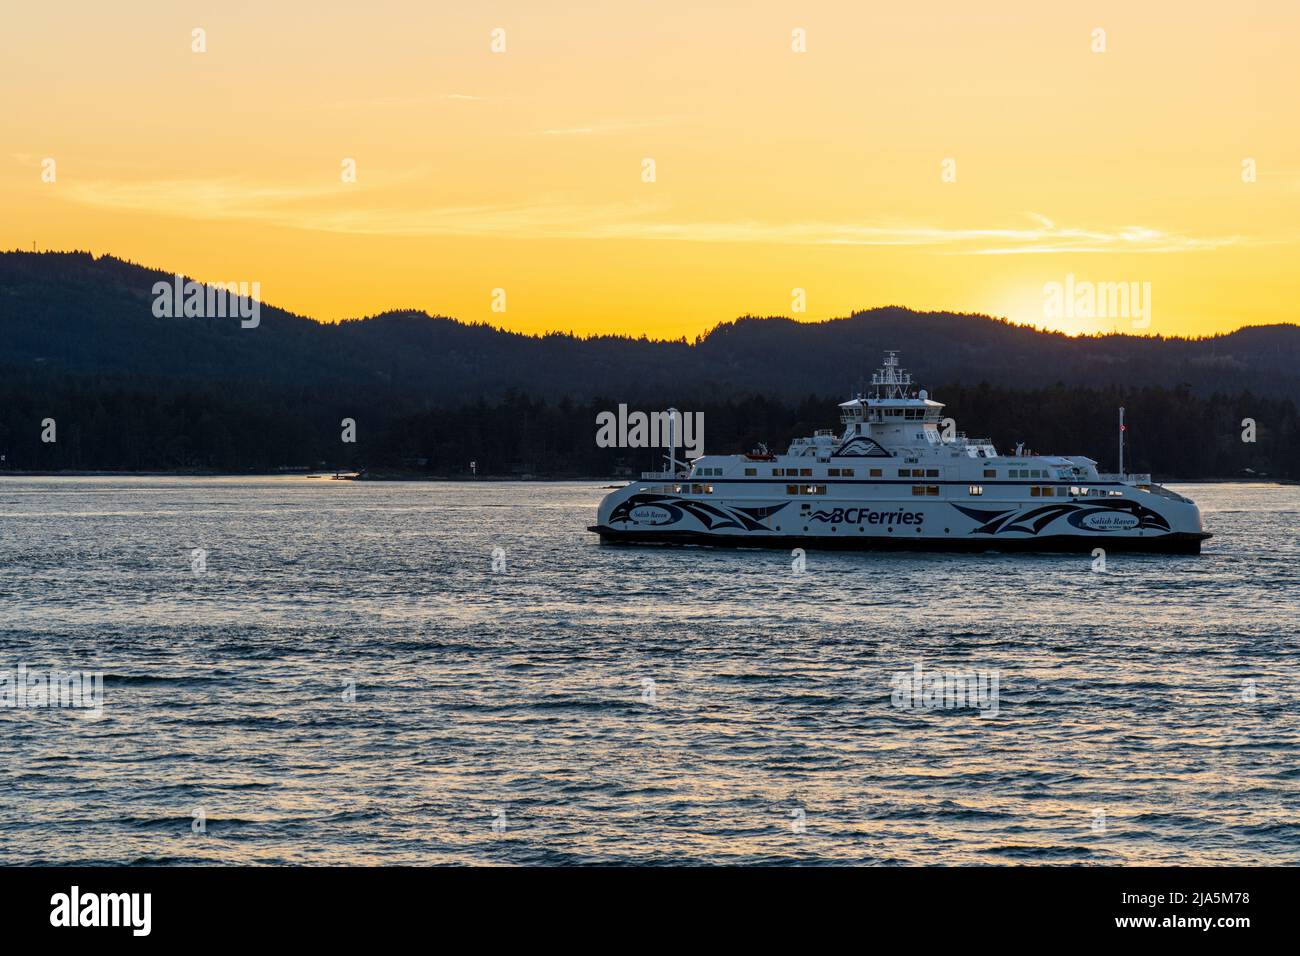 British Columbia, Canada - April 14 2021 : BC Ferries, Sunset sky over the pacific ocean, Southern Gulf Islands, Swartz Bay, Strait of Georgia. Stock Photo